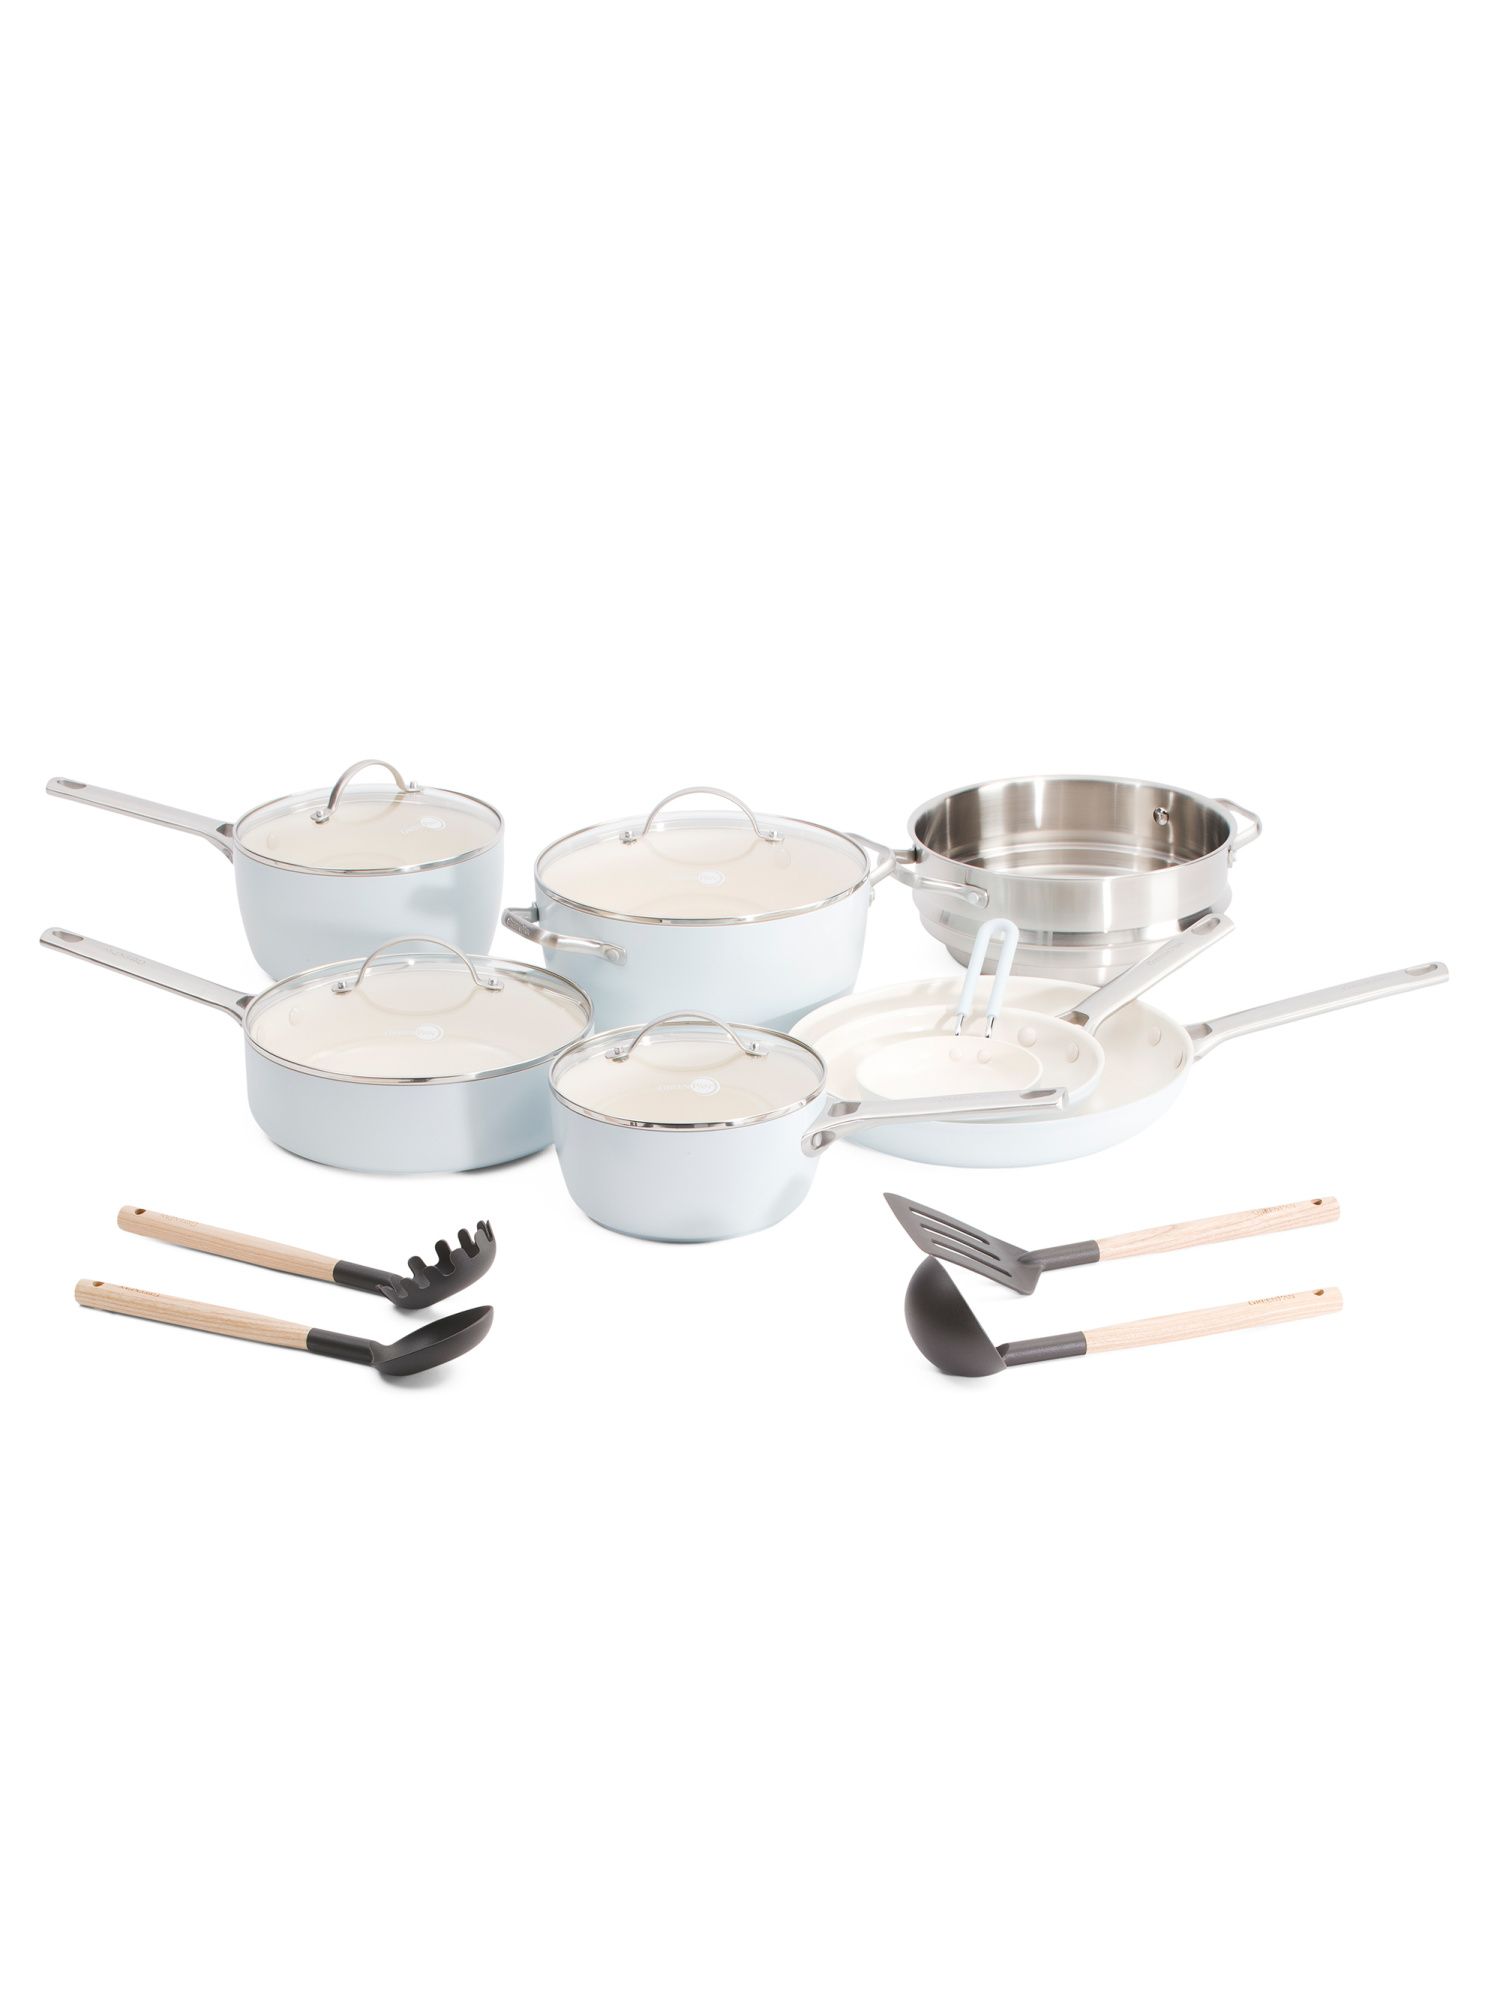 17pc Healthy Ceramic Reserve Collection Cookware Set | TJ Maxx